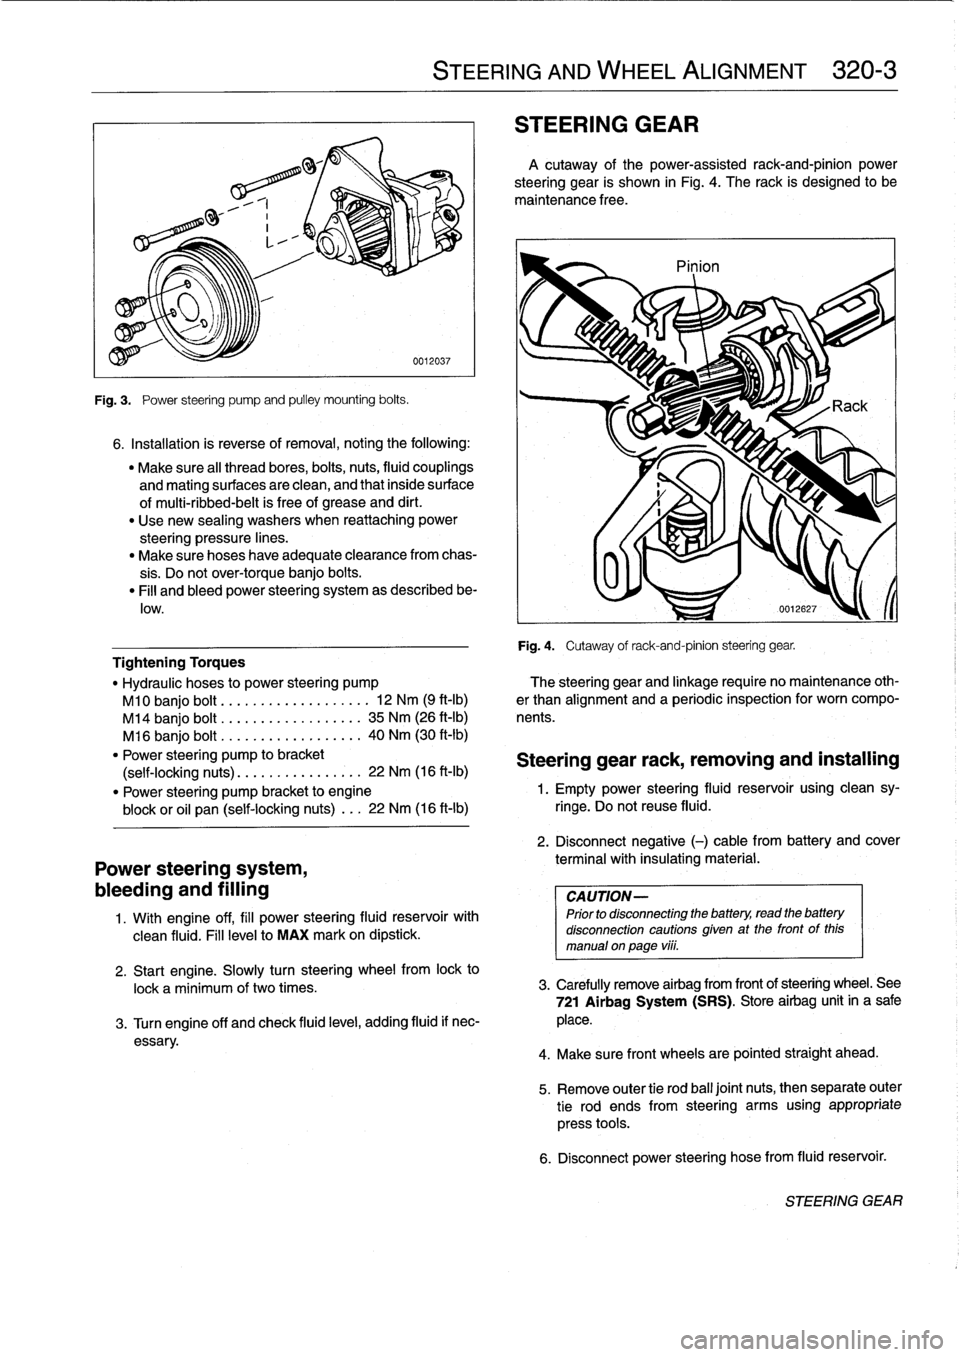 BMW 318i 1997 E36 Workshop Manual 
Fig
.
3
.

	

Power
steering
pump
and
pulley
mounting
bolts
.

6
.
Installation
is
reverse
of
removal,
noting
the
following
:

"
Make
sure
al¡
thread
bores,
bolts,
nuts,
fluid
couplings

and
mating
